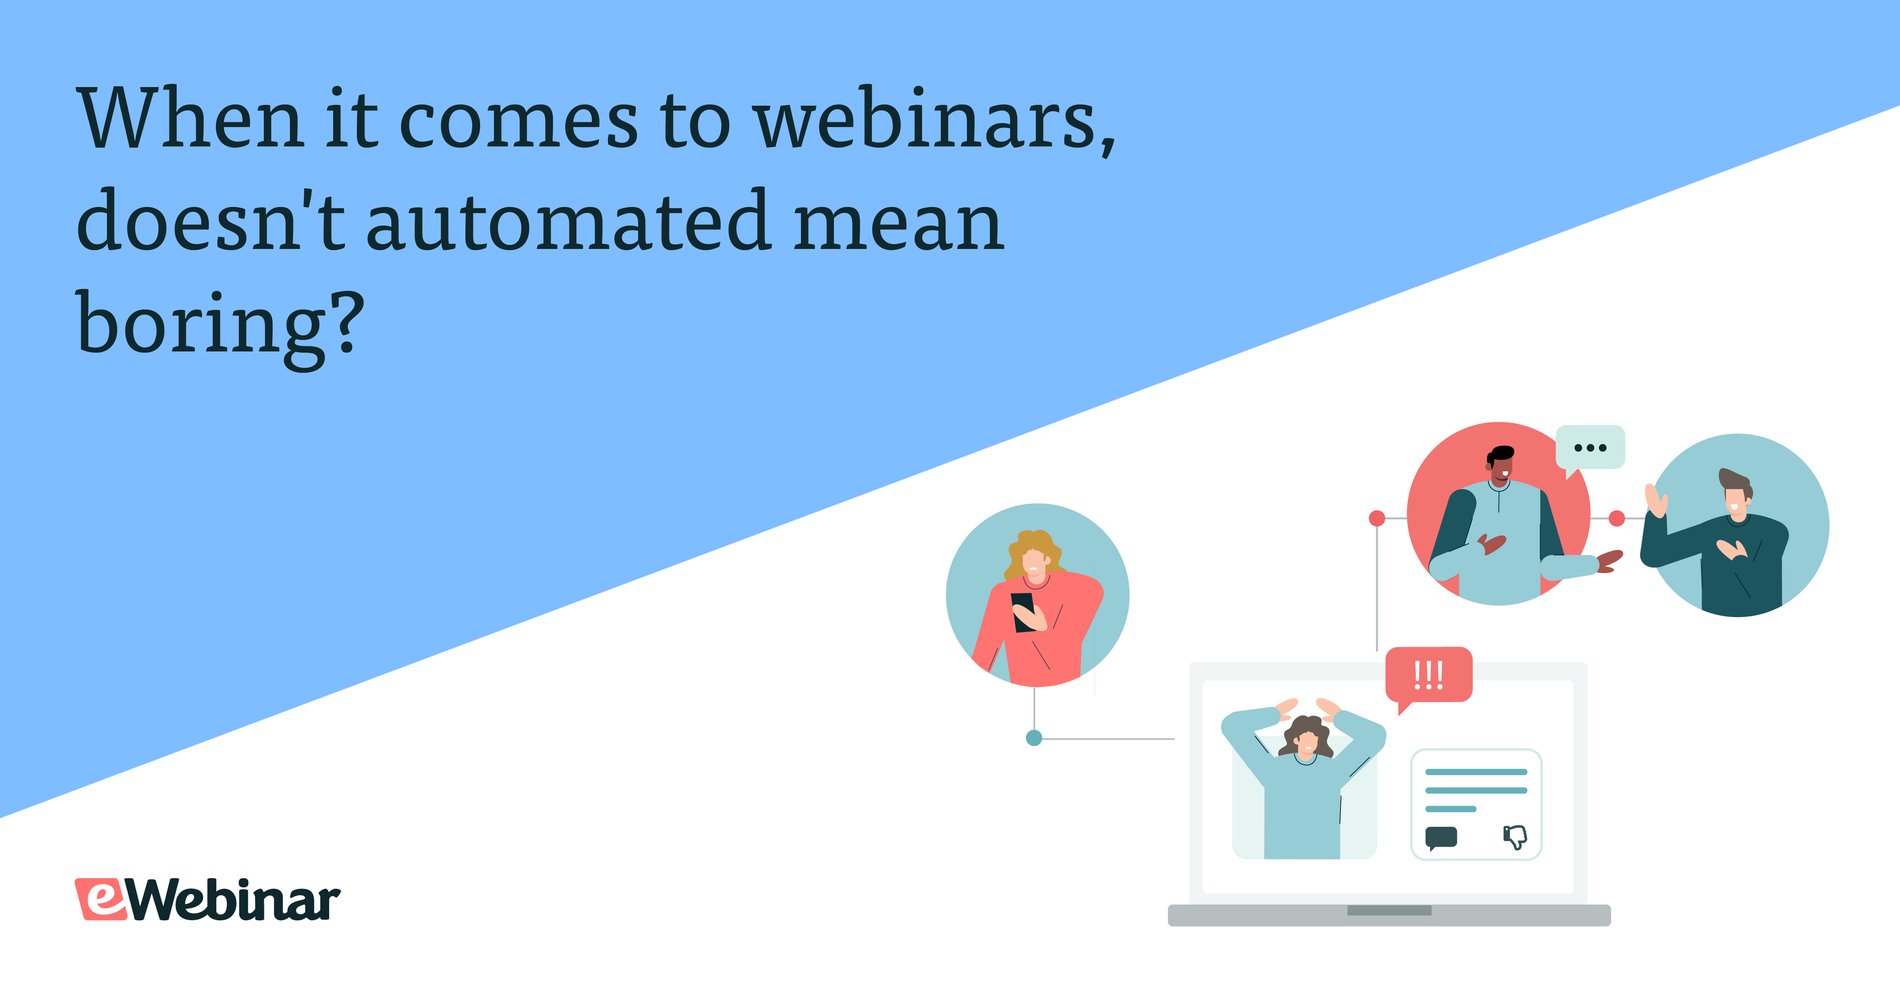 When it comes to webinars, doesn't automated mean boring?